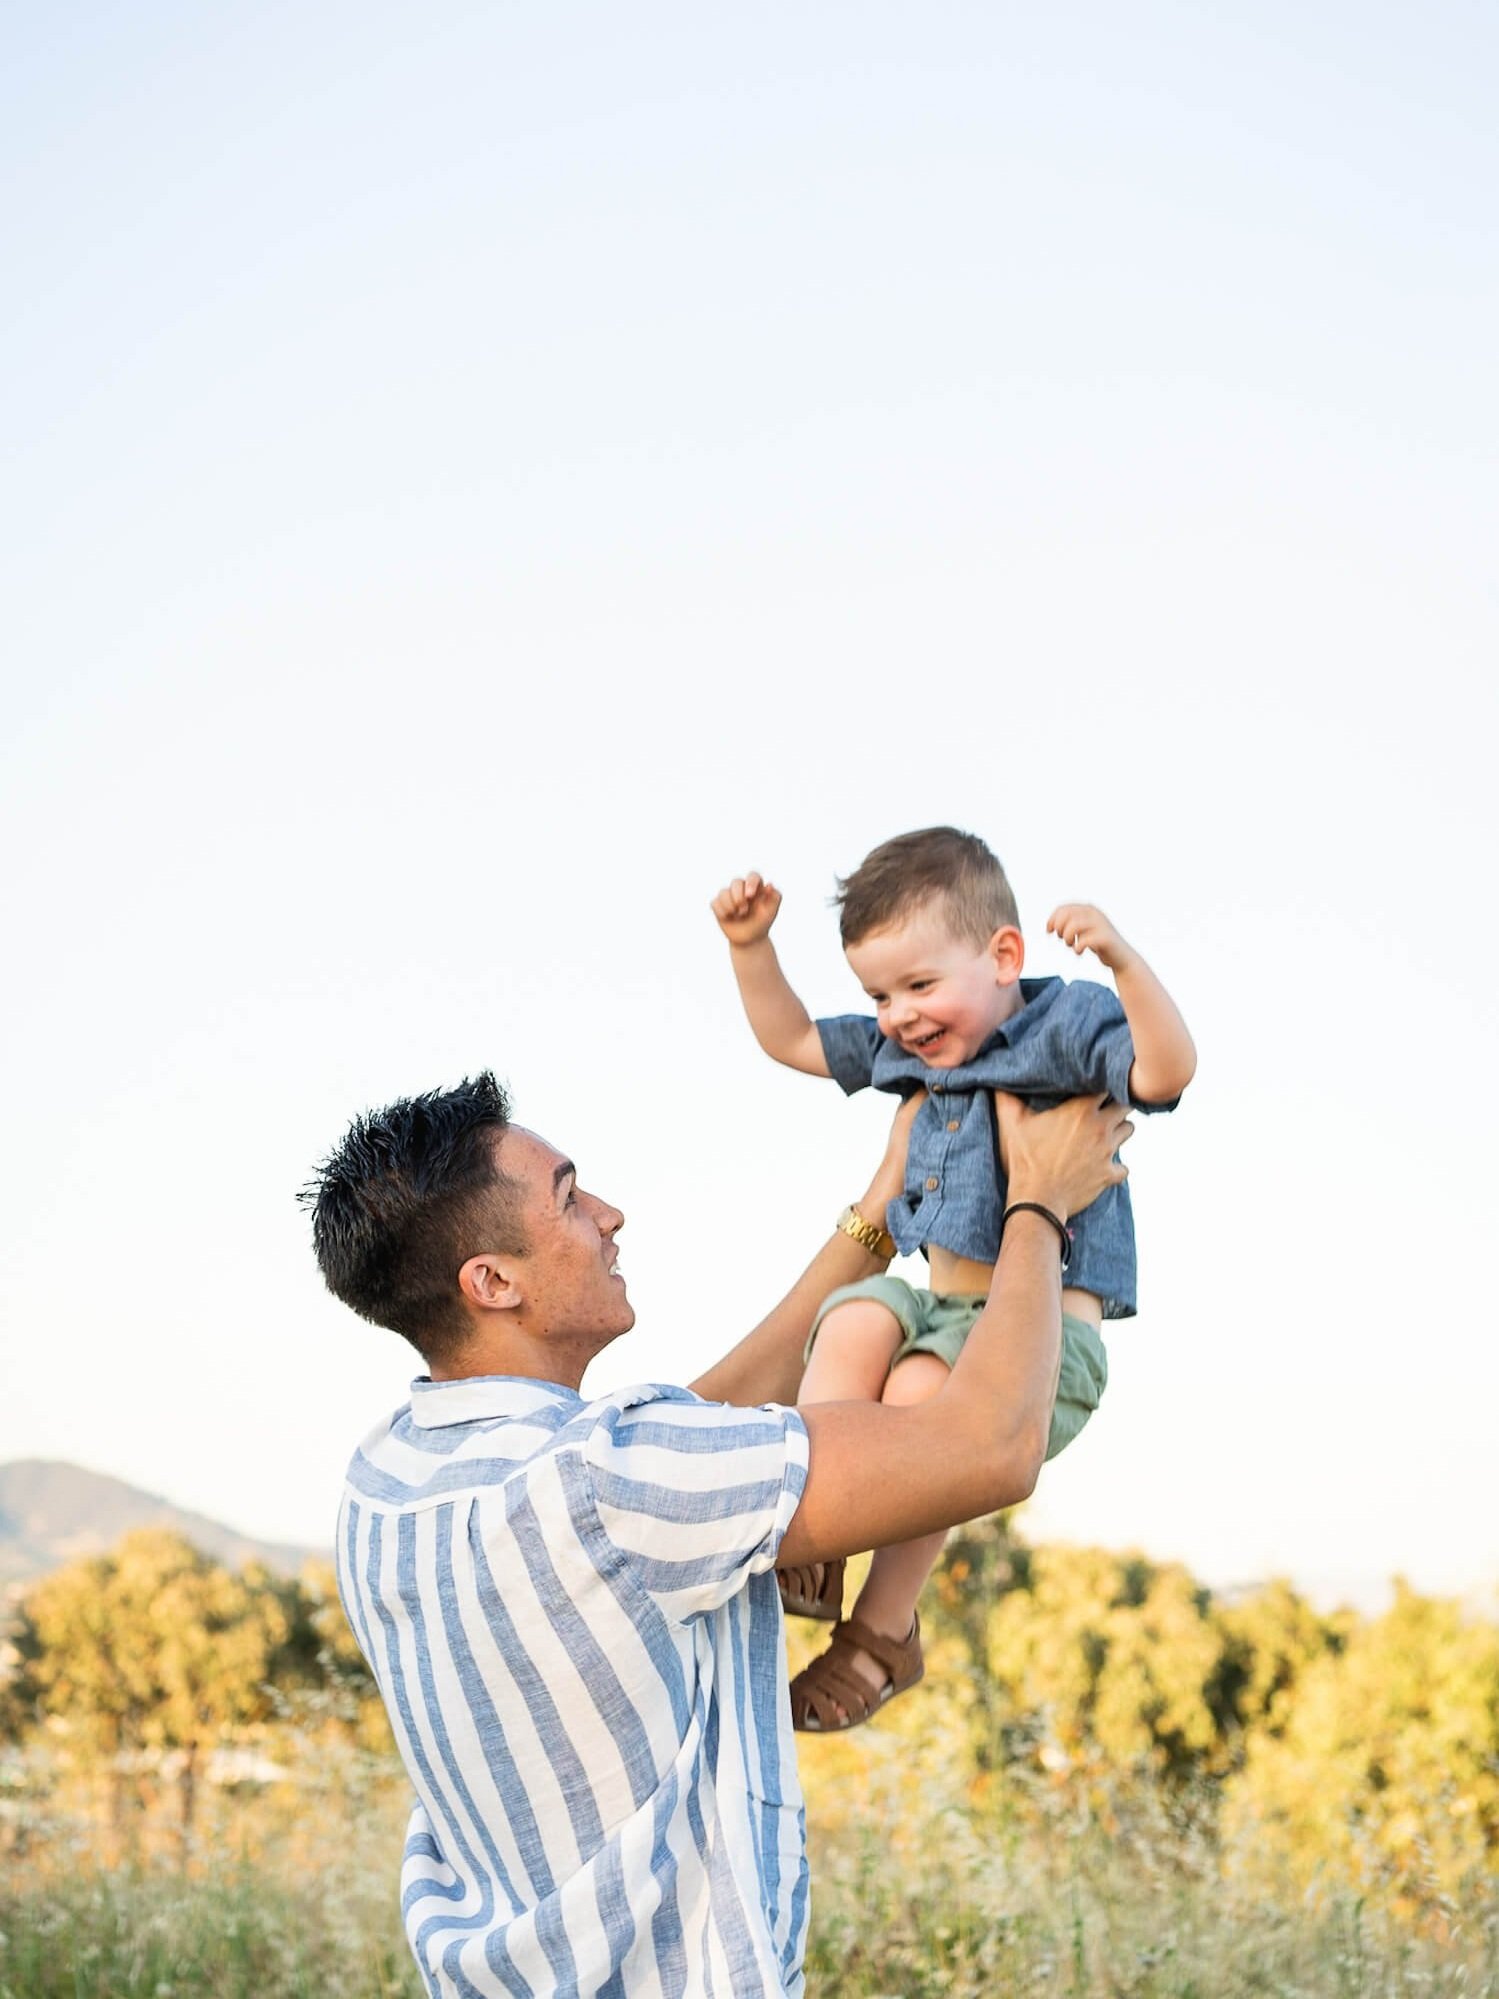 A father lifting his smiling son into the air  – image captured by Sunday Muse Studio